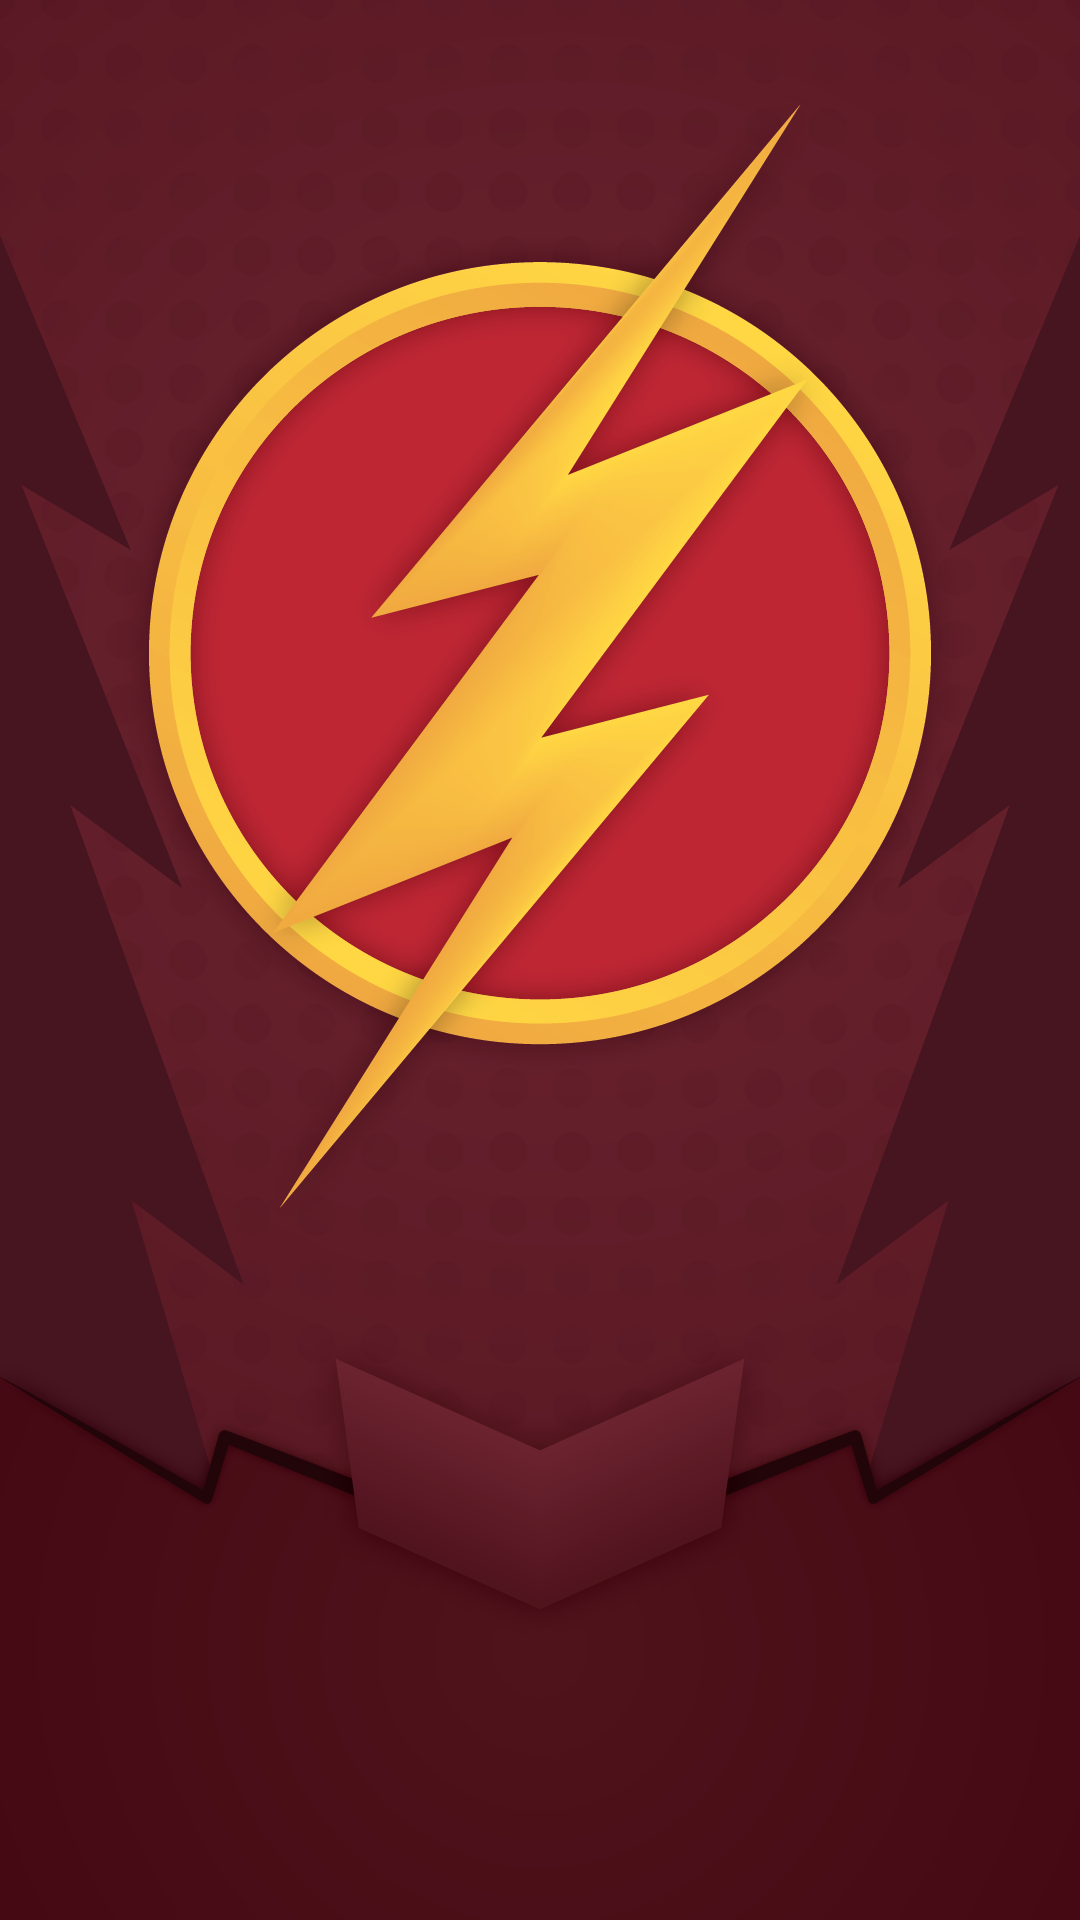 the flash iphone wallpaper,red,maroon,logo,flash,font